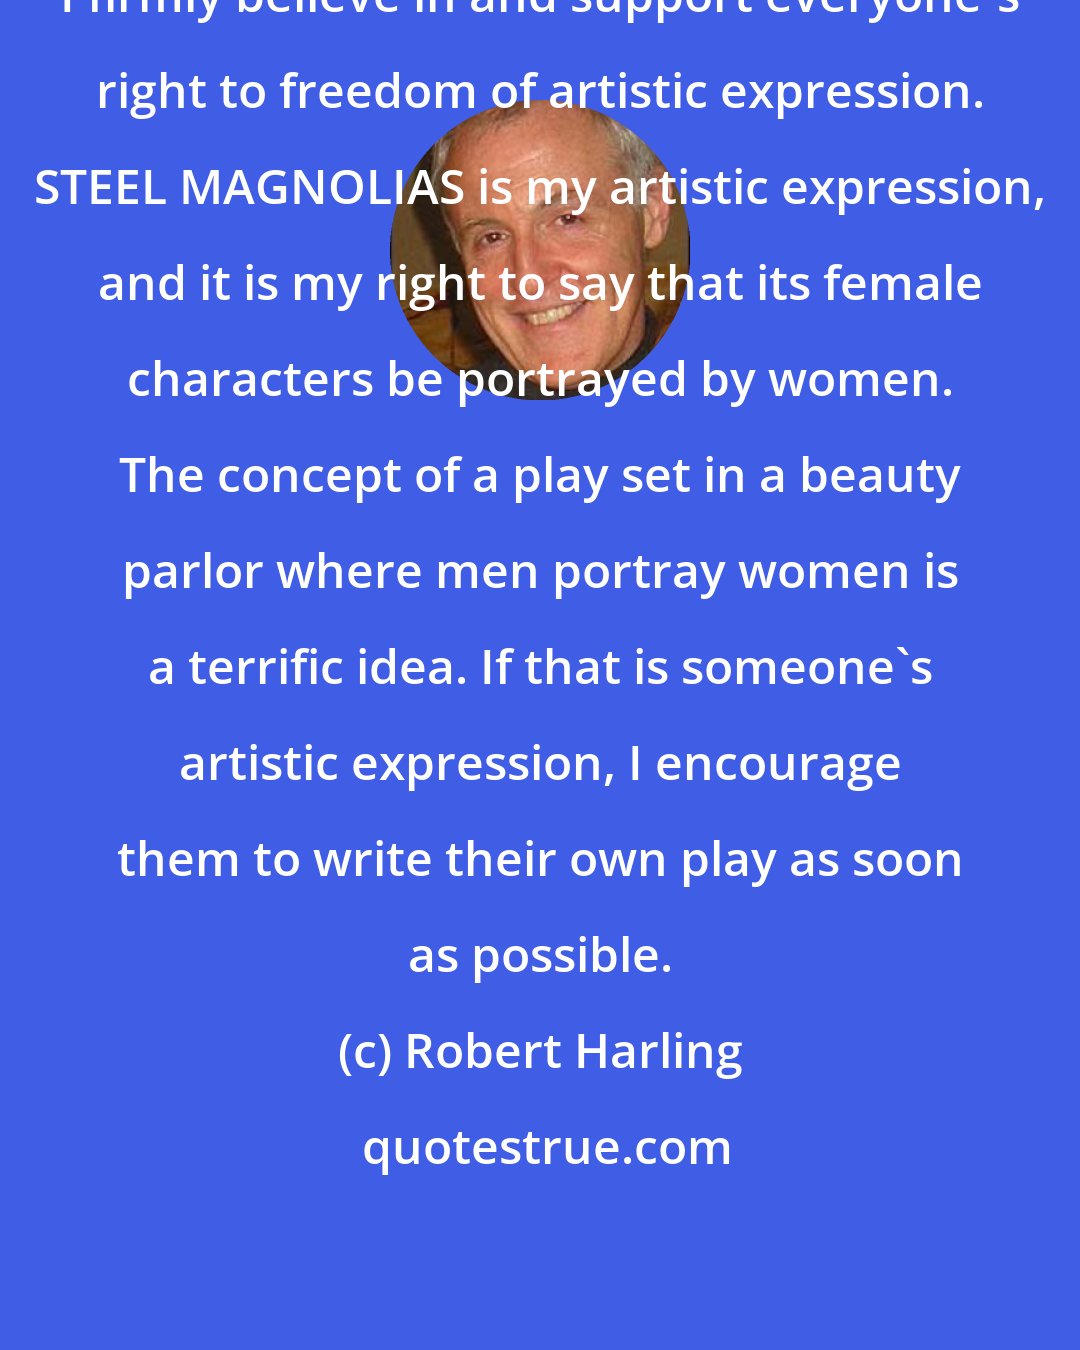 Robert Harling: I firmly believe in and support everyone's right to freedom of artistic expression. STEEL MAGNOLIAS is my artistic expression, and it is my right to say that its female characters be portrayed by women. The concept of a play set in a beauty parlor where men portray women is a terrific idea. If that is someone's artistic expression, I encourage them to write their own play as soon as possible.